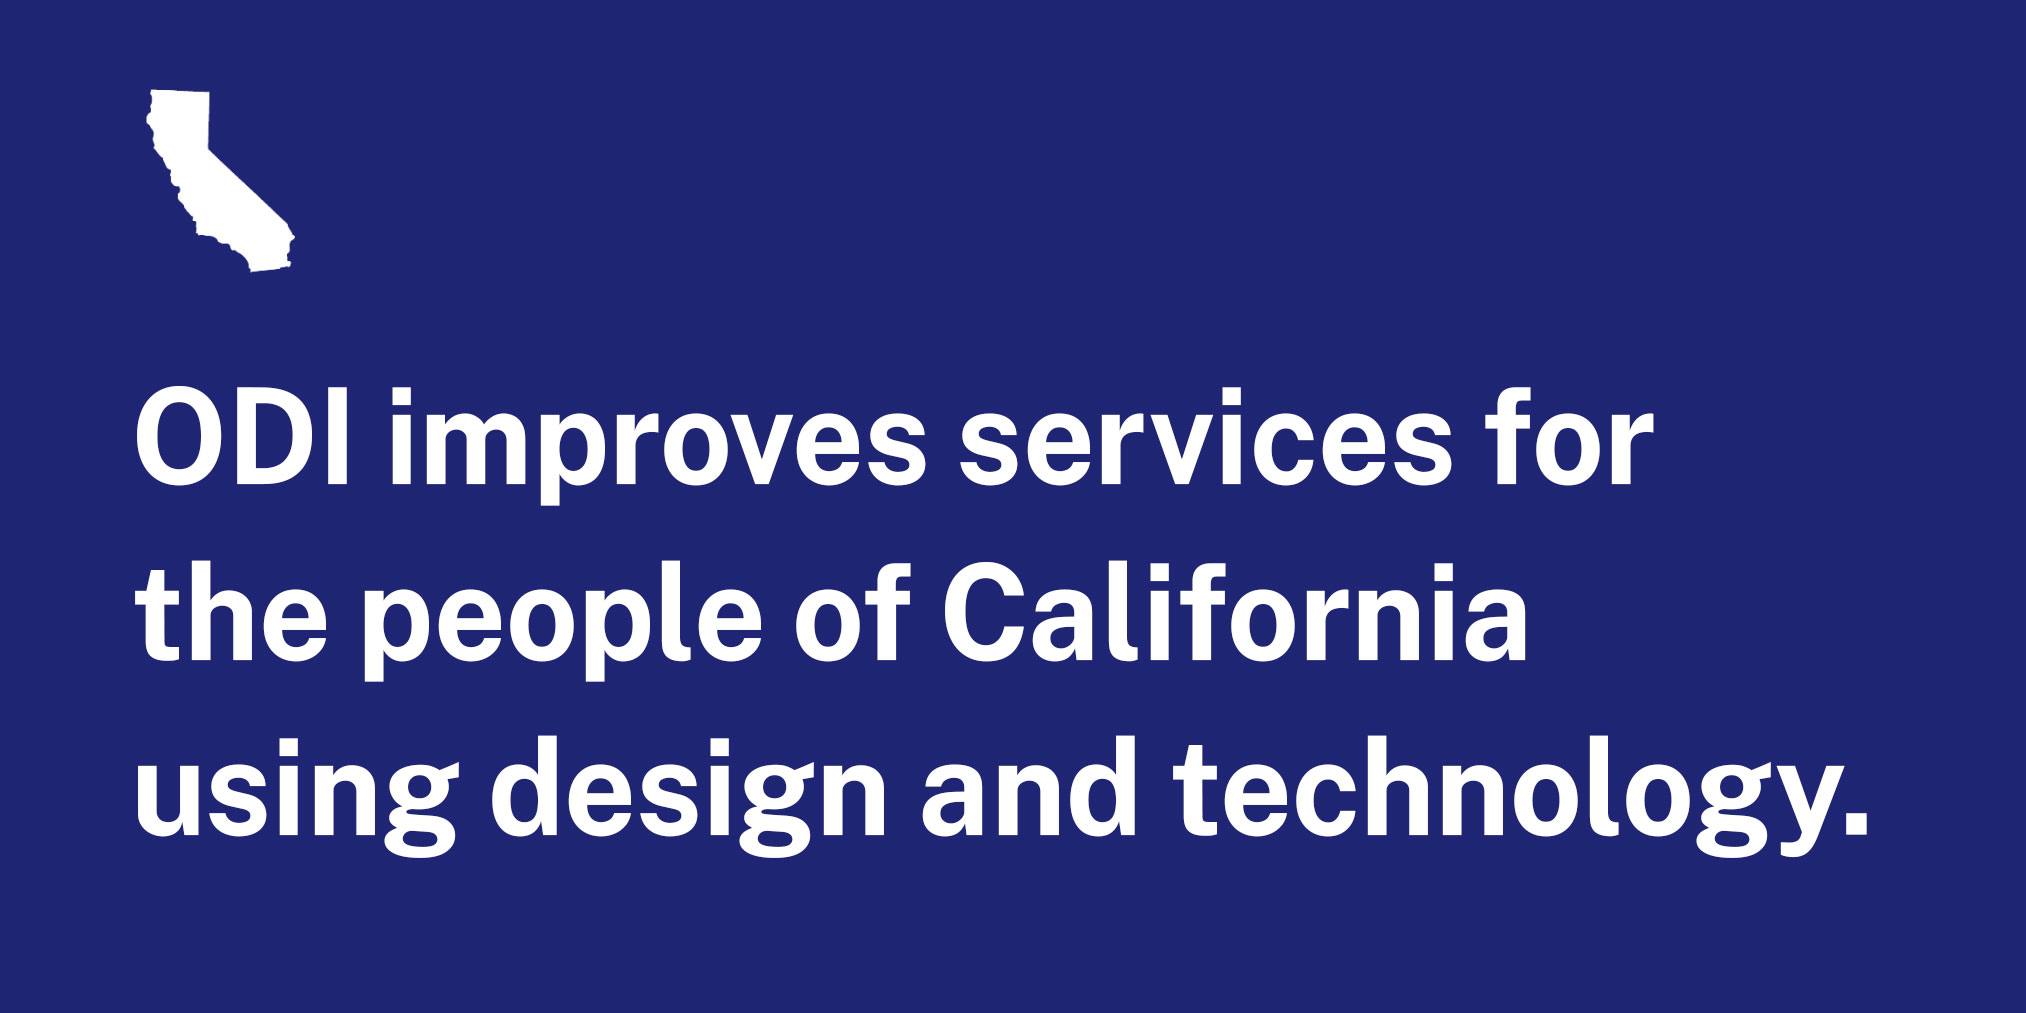 ODI improves services for the people of California using design and technology